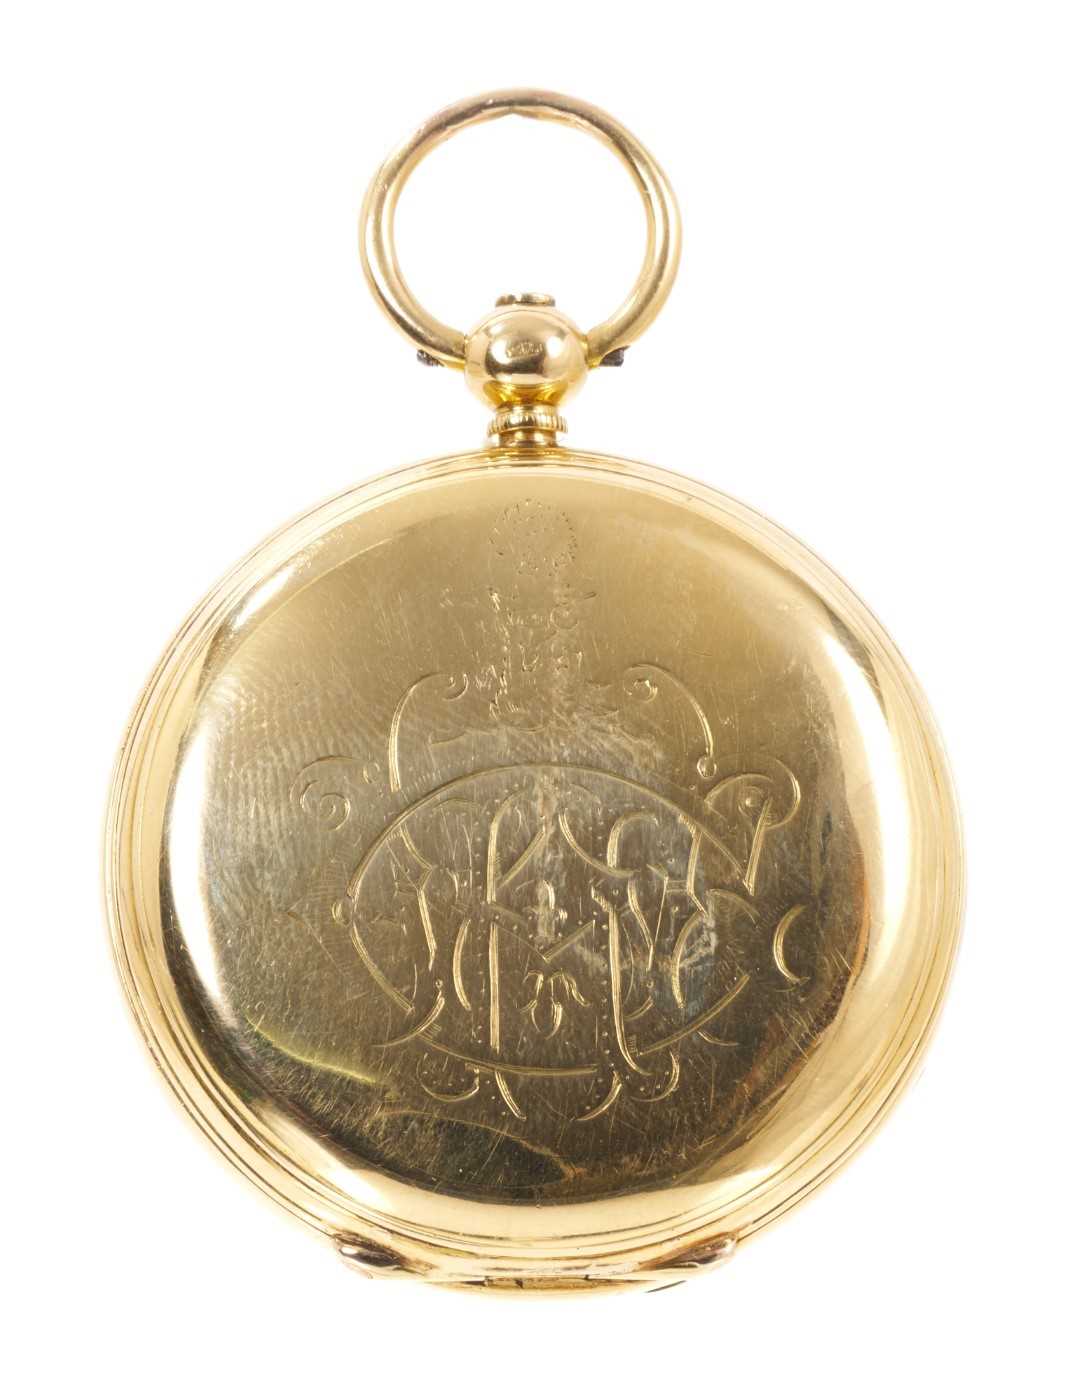 Victorian 18ct gold hunter pocket watch by Moyle, Chichester - Image 2 of 3